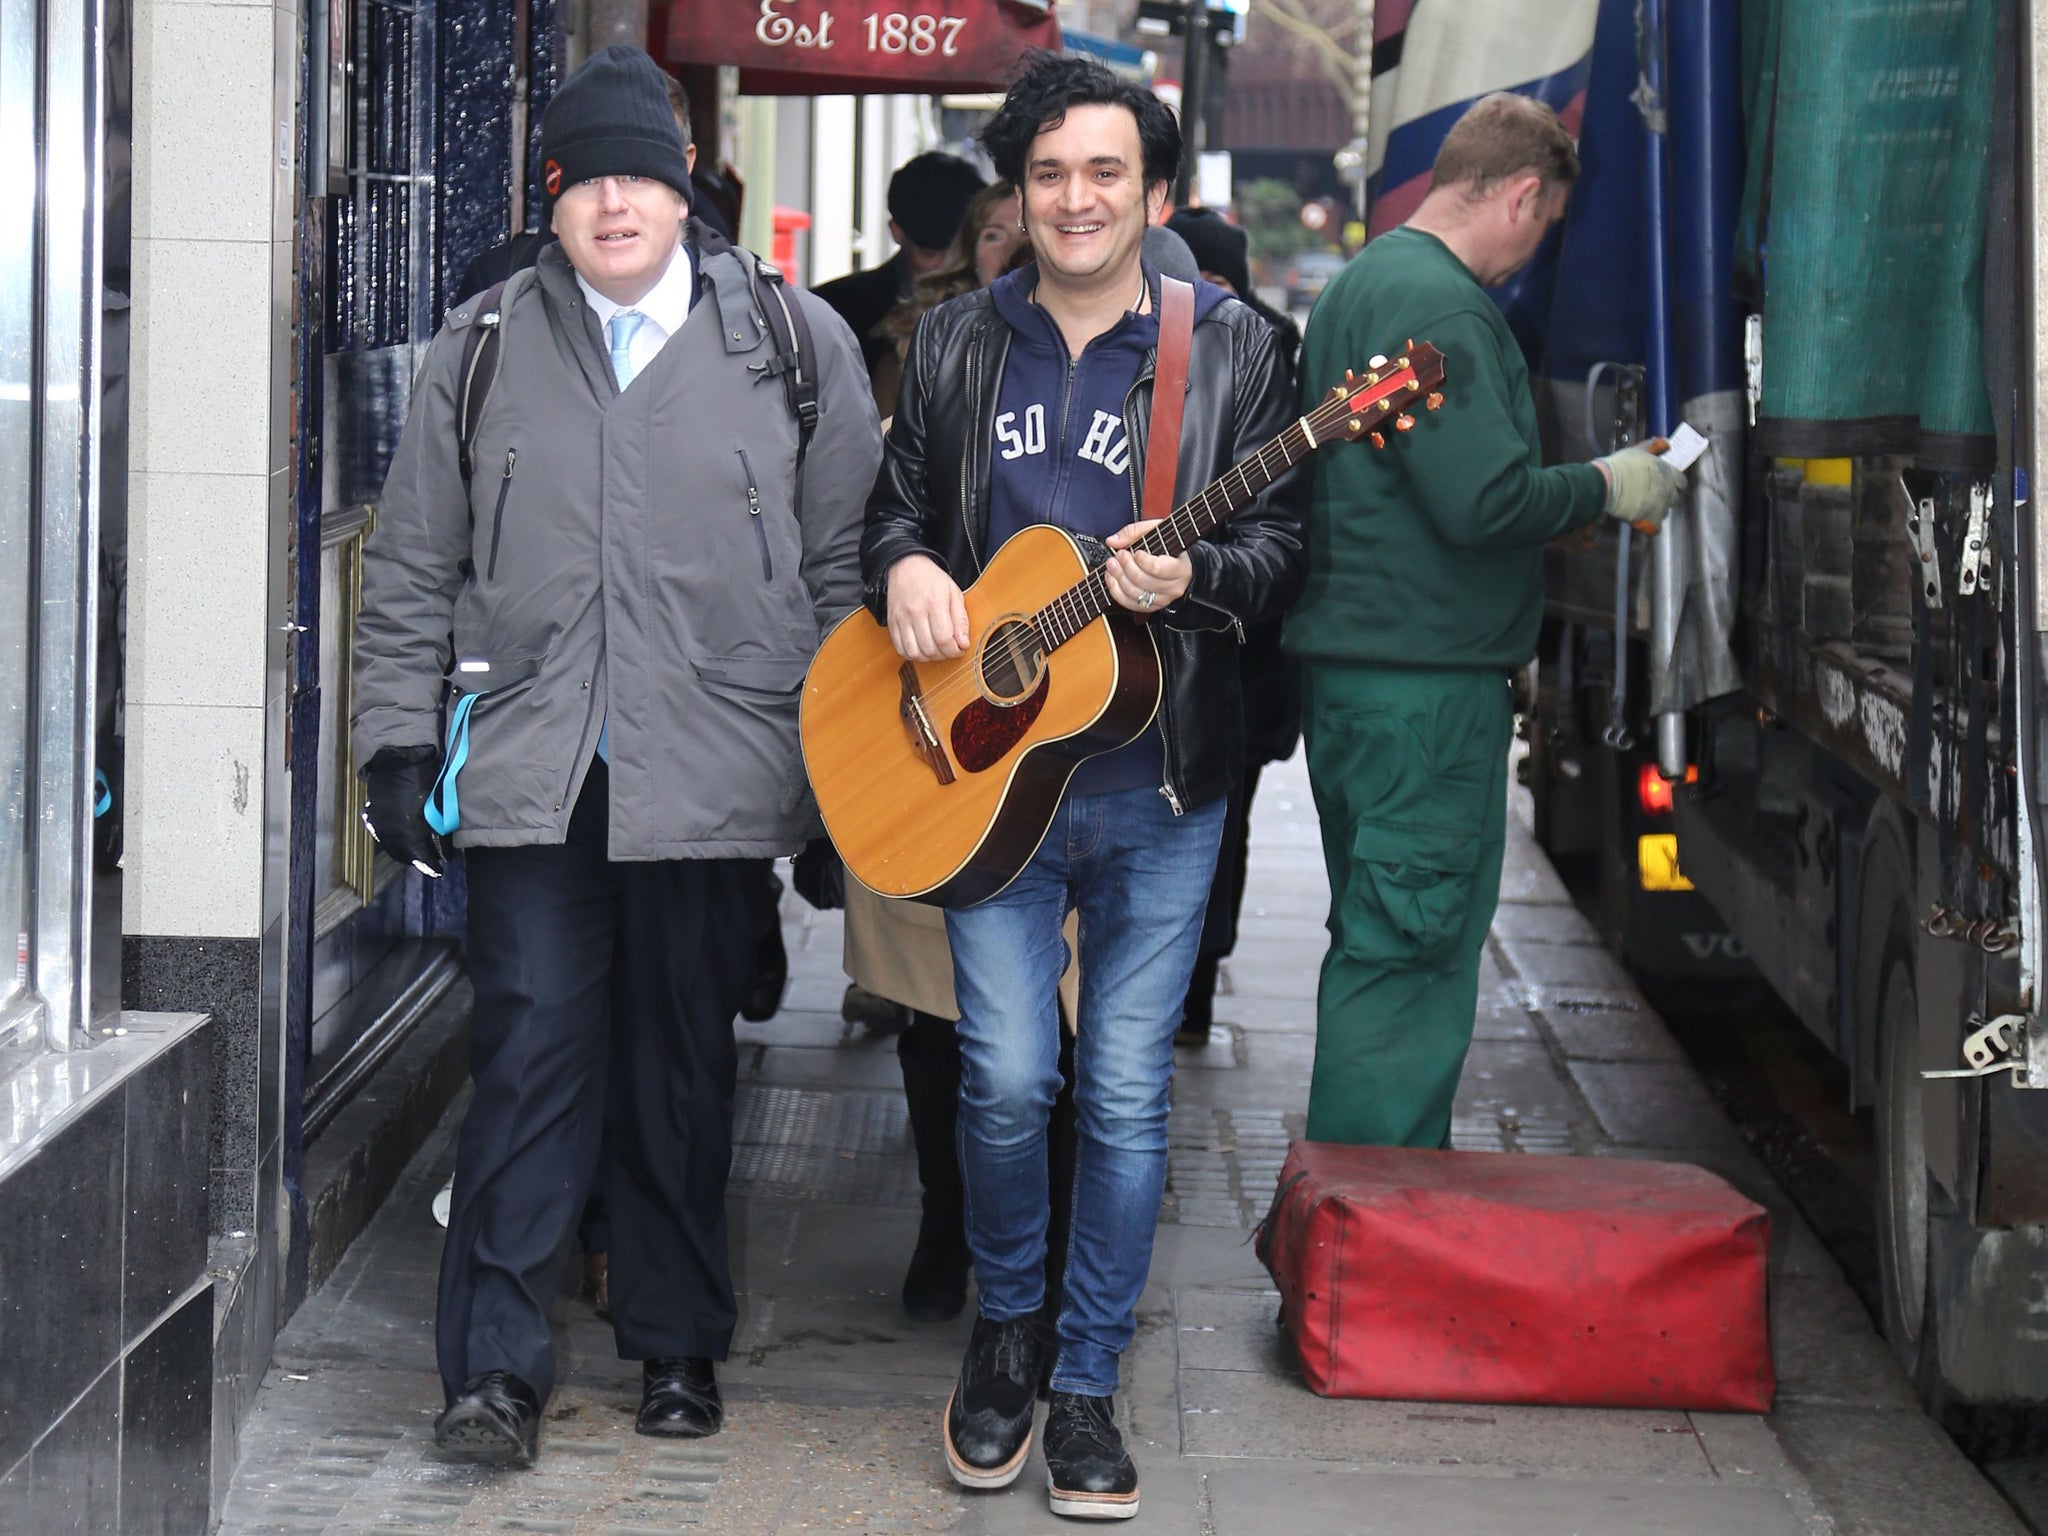 Boris Johnson with The Voice contestant Tim Arnold. The pair were out in London as part of the Save Soho campaign.